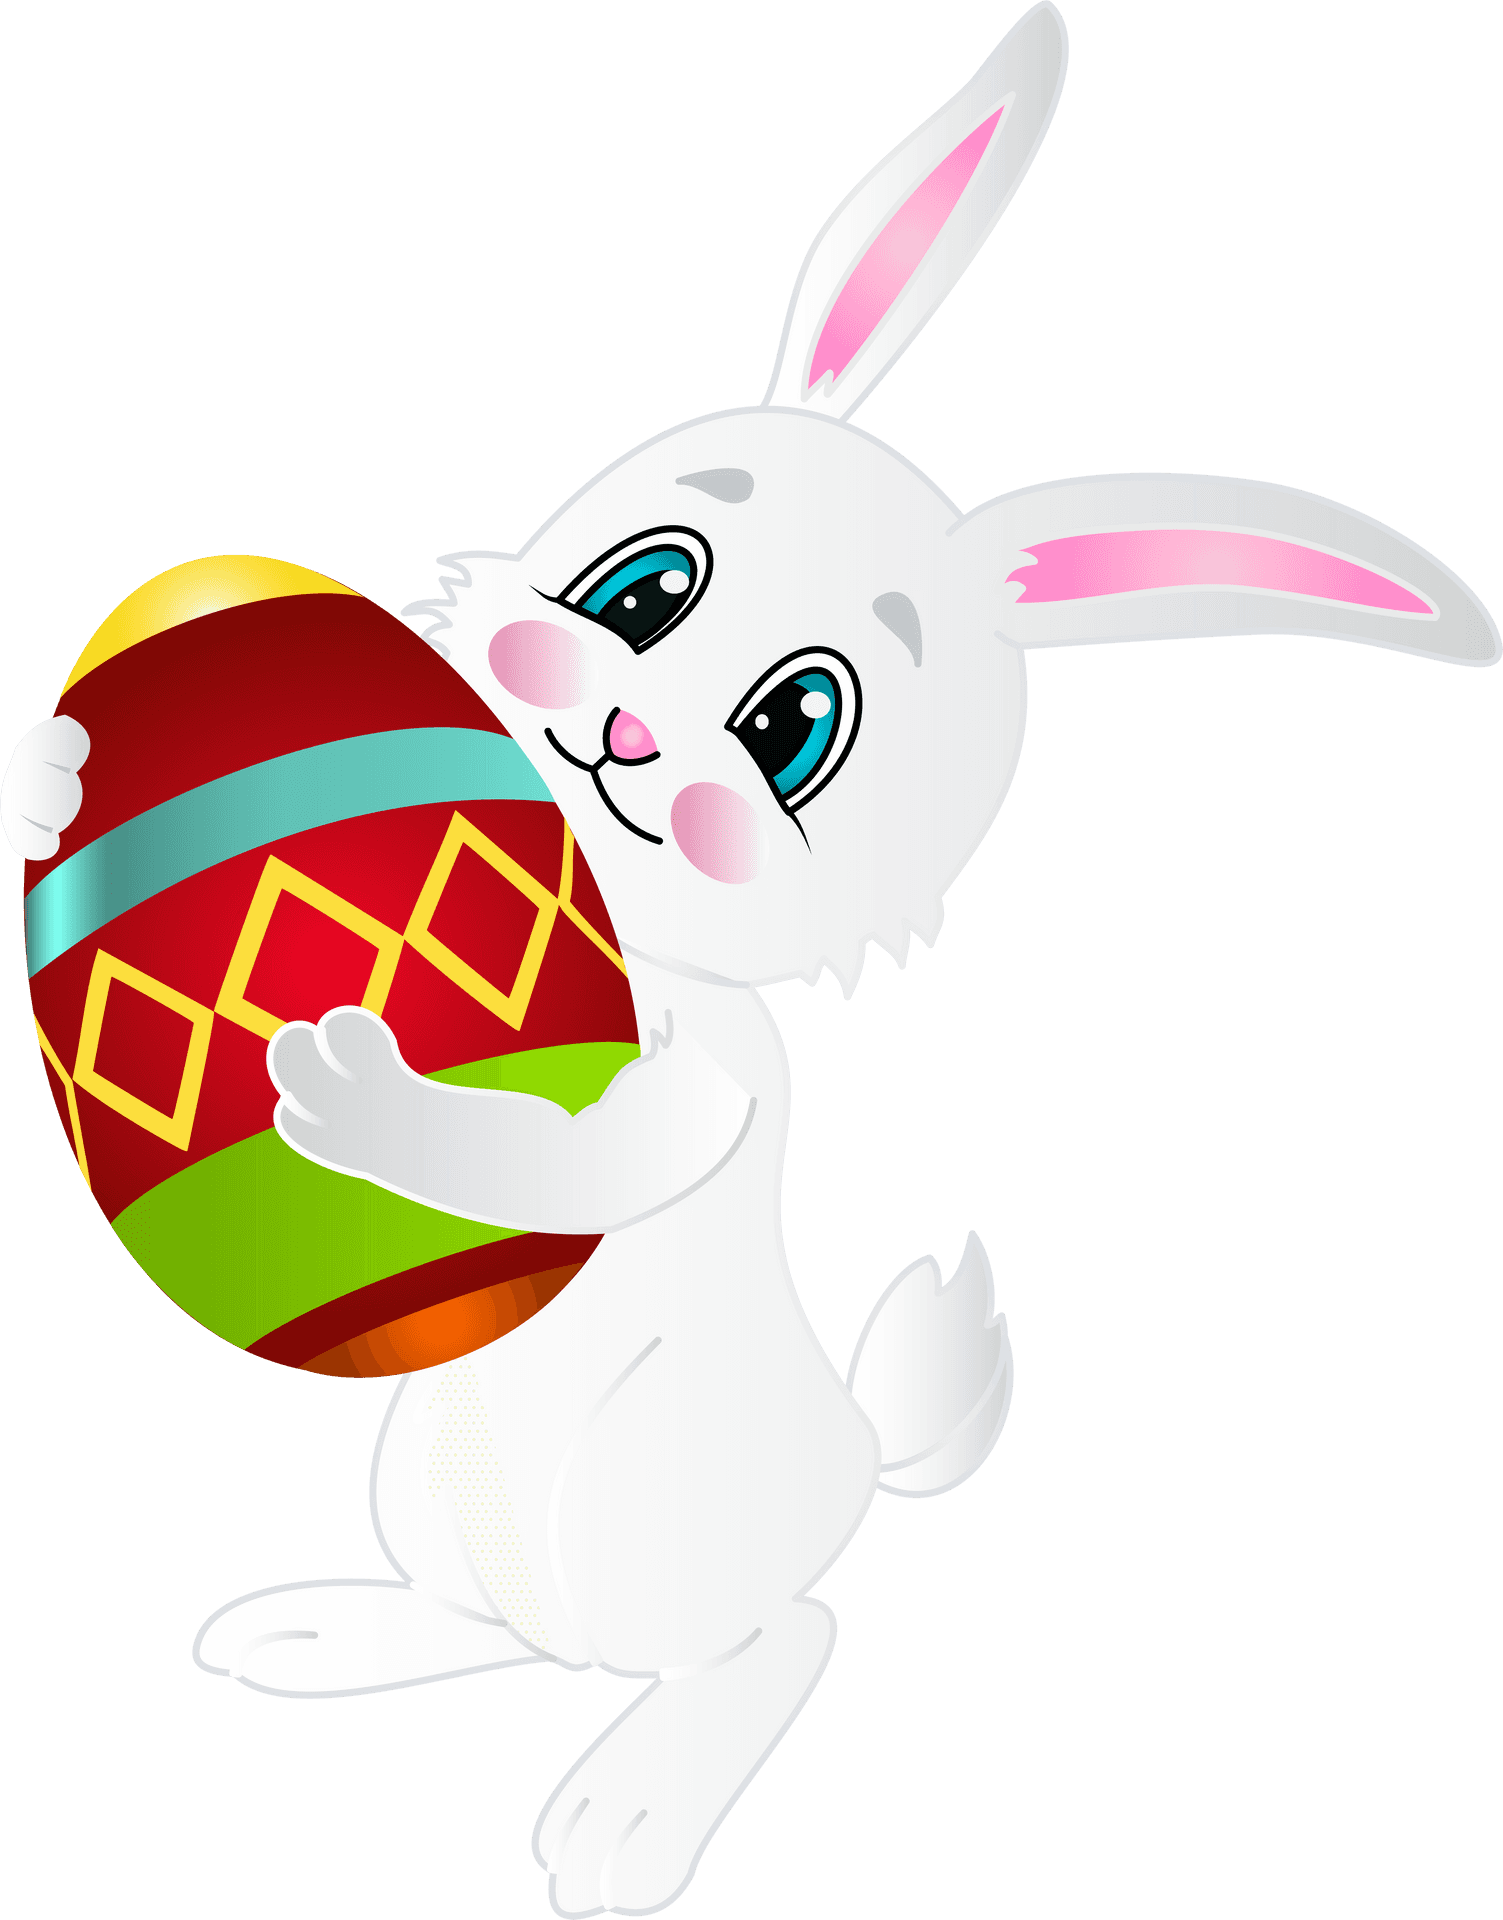 Easter Bunny Holding Decorated Egg PNG